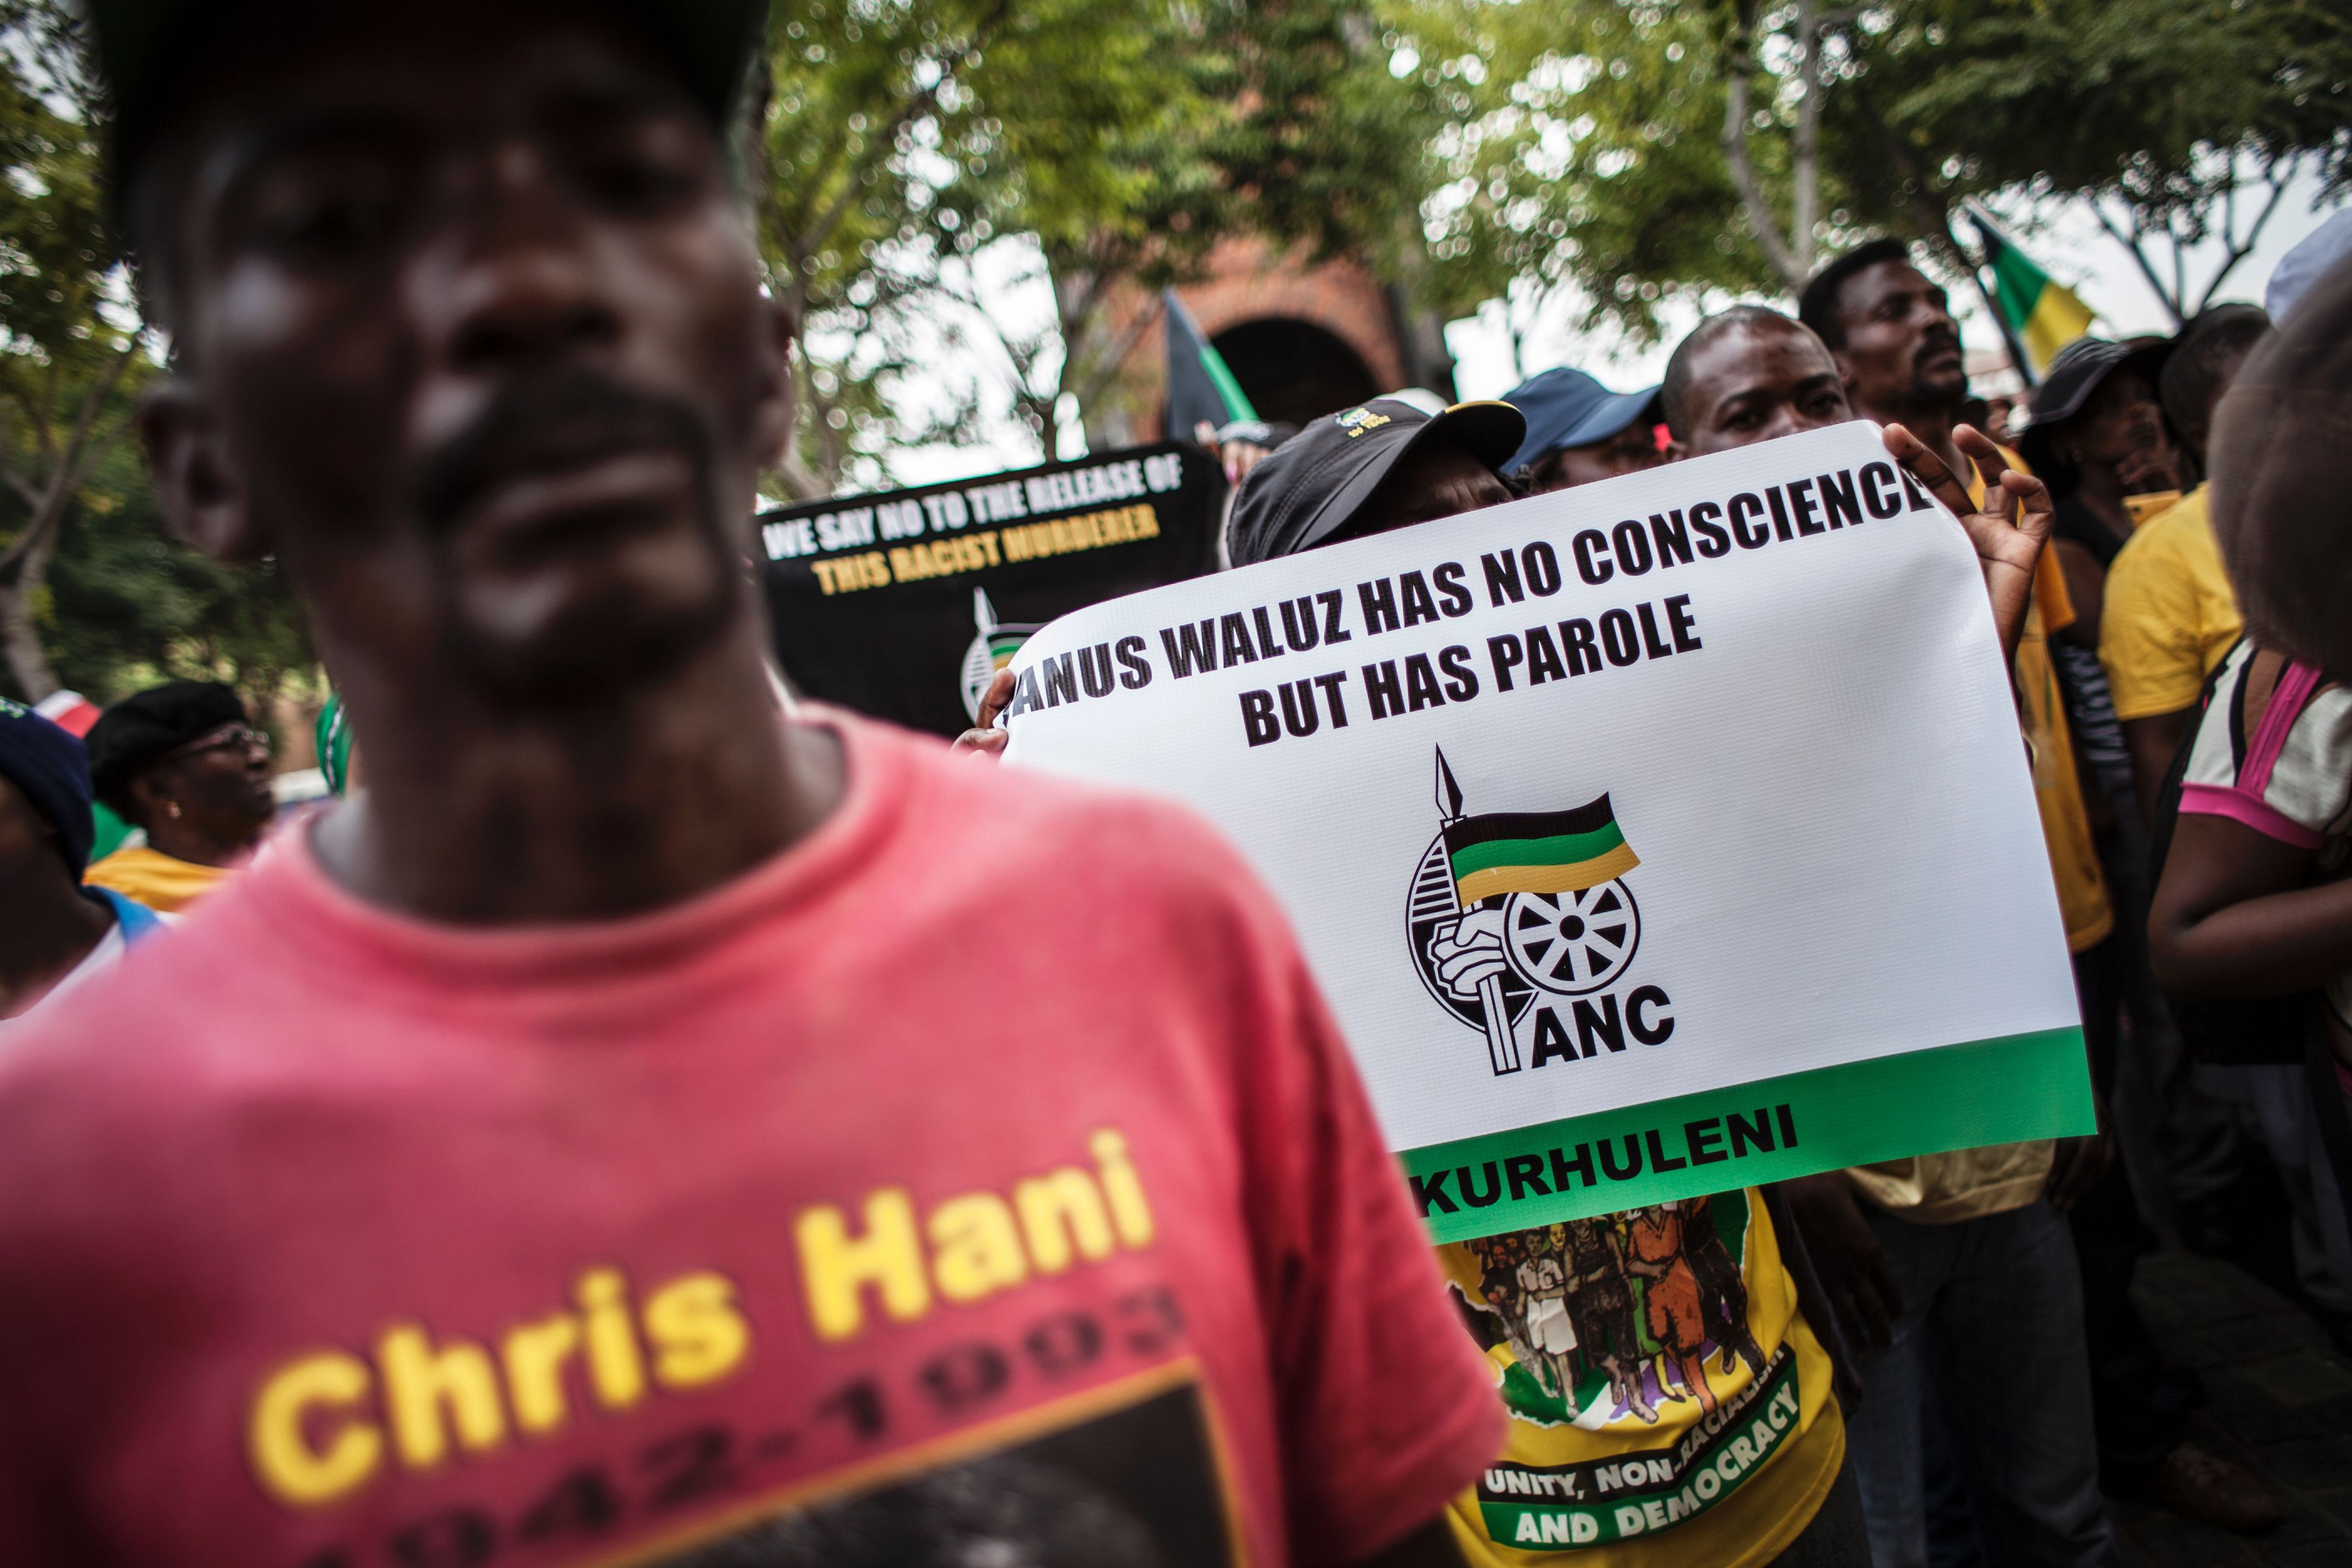 Members of the African National Congress demonstrate outside the Constitutional Court in protest over the parole granted to Janusz Walus, the killer of the anti-apartheid hero Chris Hani on March 14, 2016 (John Wessels—AFP/Getty Images)